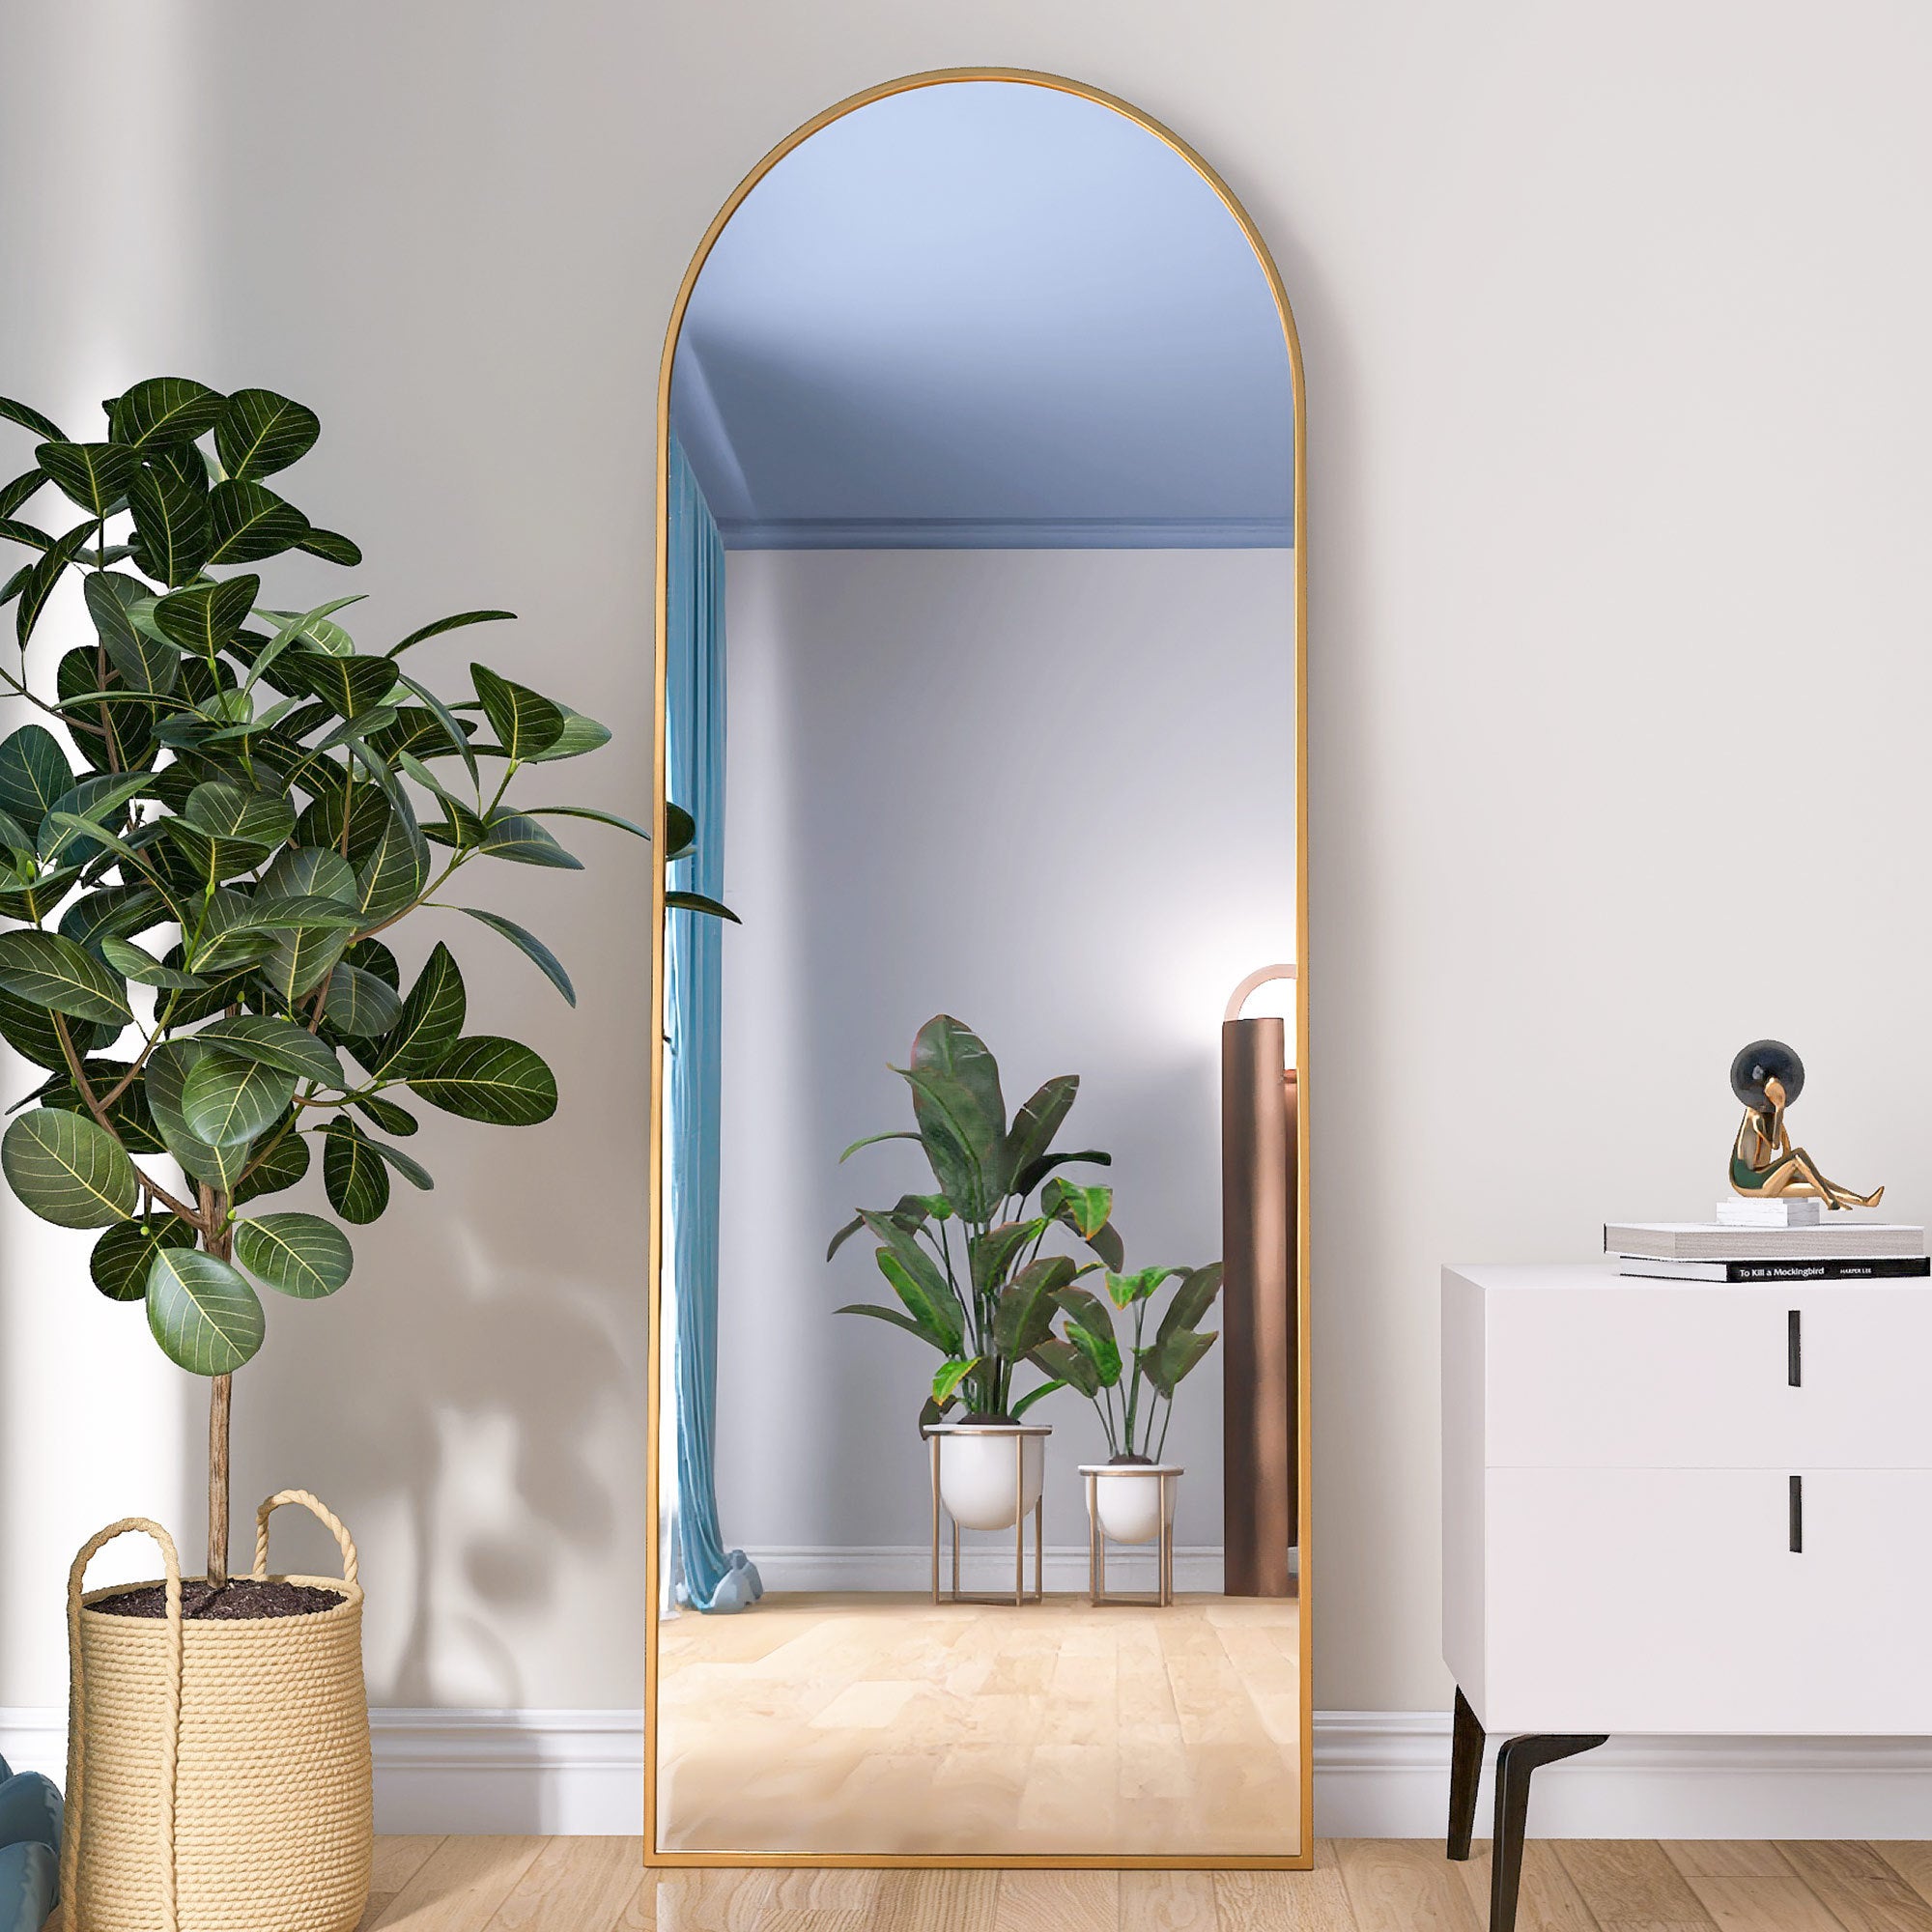 Arched Full Length Mirror Floor Mirror Hanging Standing or Leaning (Gold)